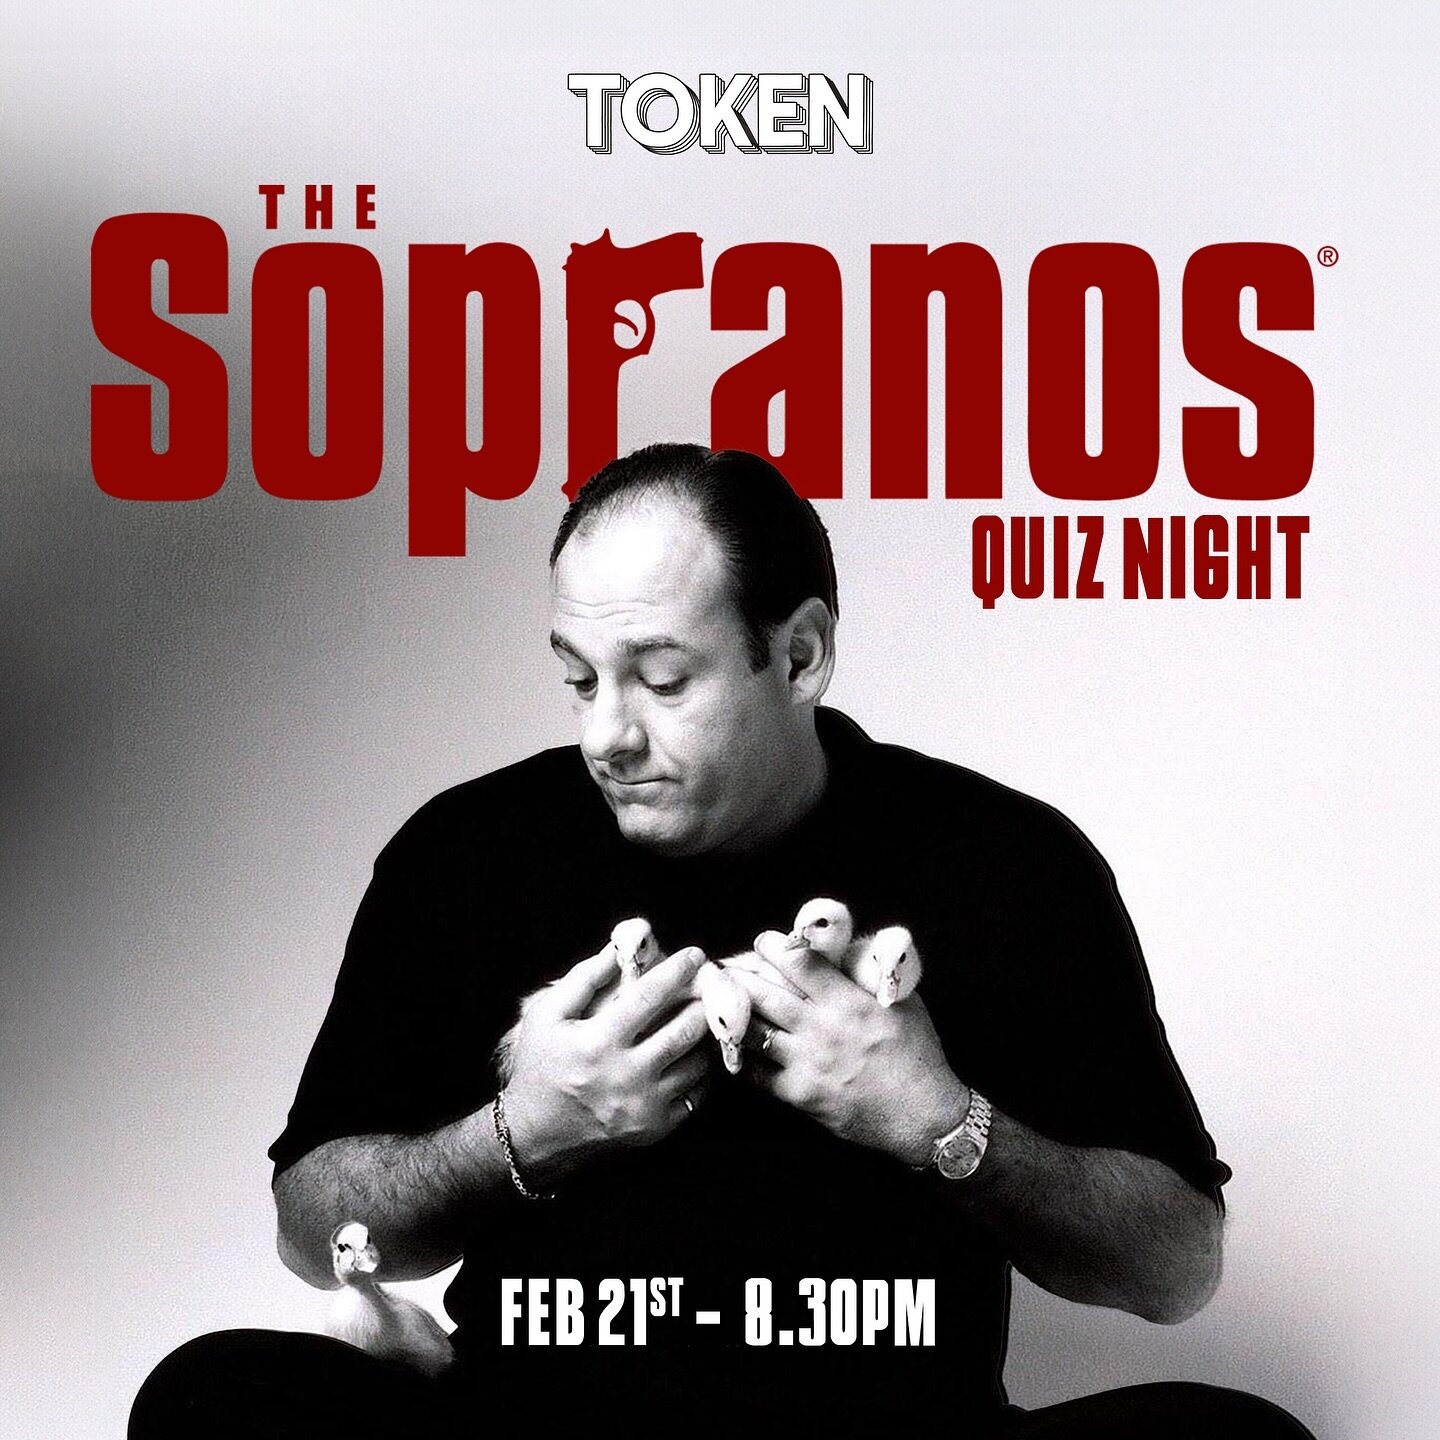 🎟️ Tickets are now on sale for our Sopranos Quiz Night on Feb 21st, 8.30pm! Available through the link in our bio, or on our website.
 
Costs &euro;30 per table (table holds up to 5 people), winner takes home &euro;150, there will be a themed menu a